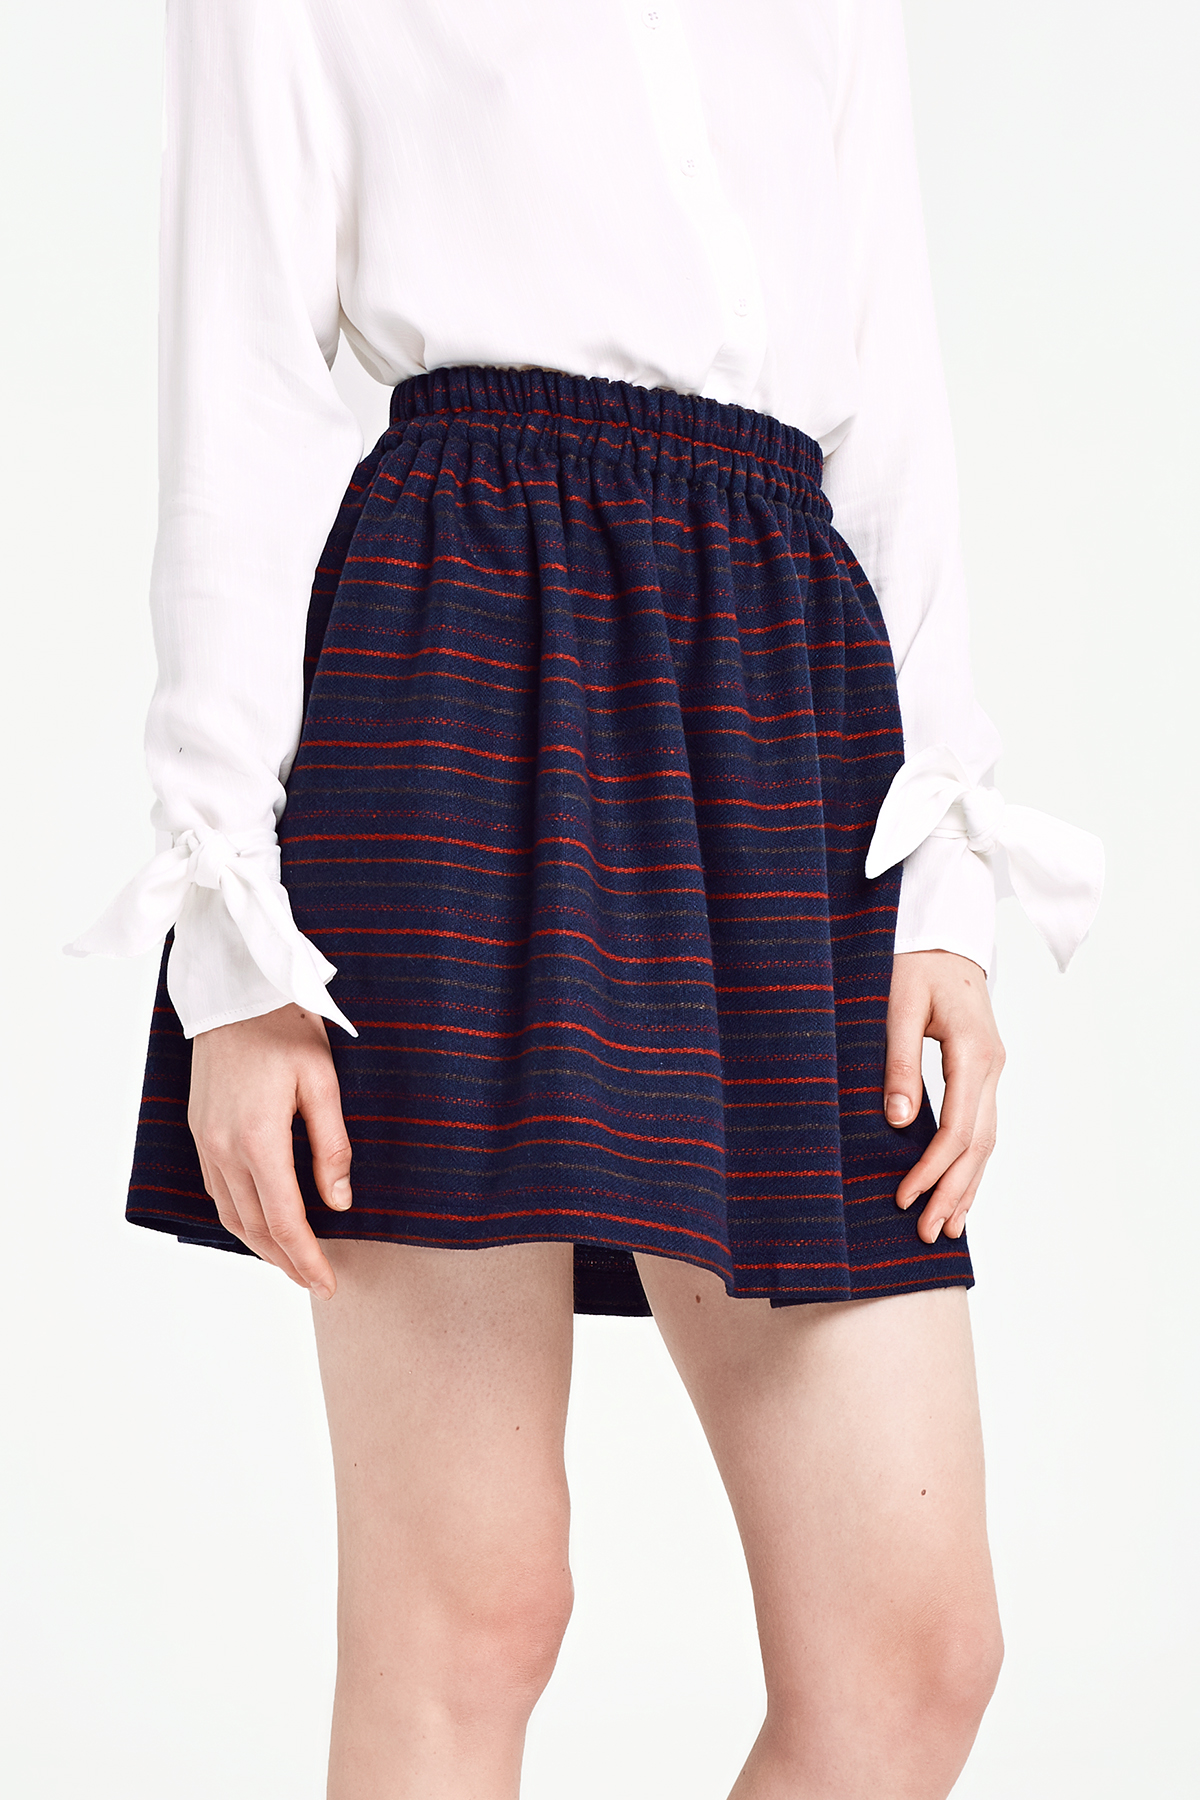 Dark blue skirt with an elastic waistband and red stripes, photo 1